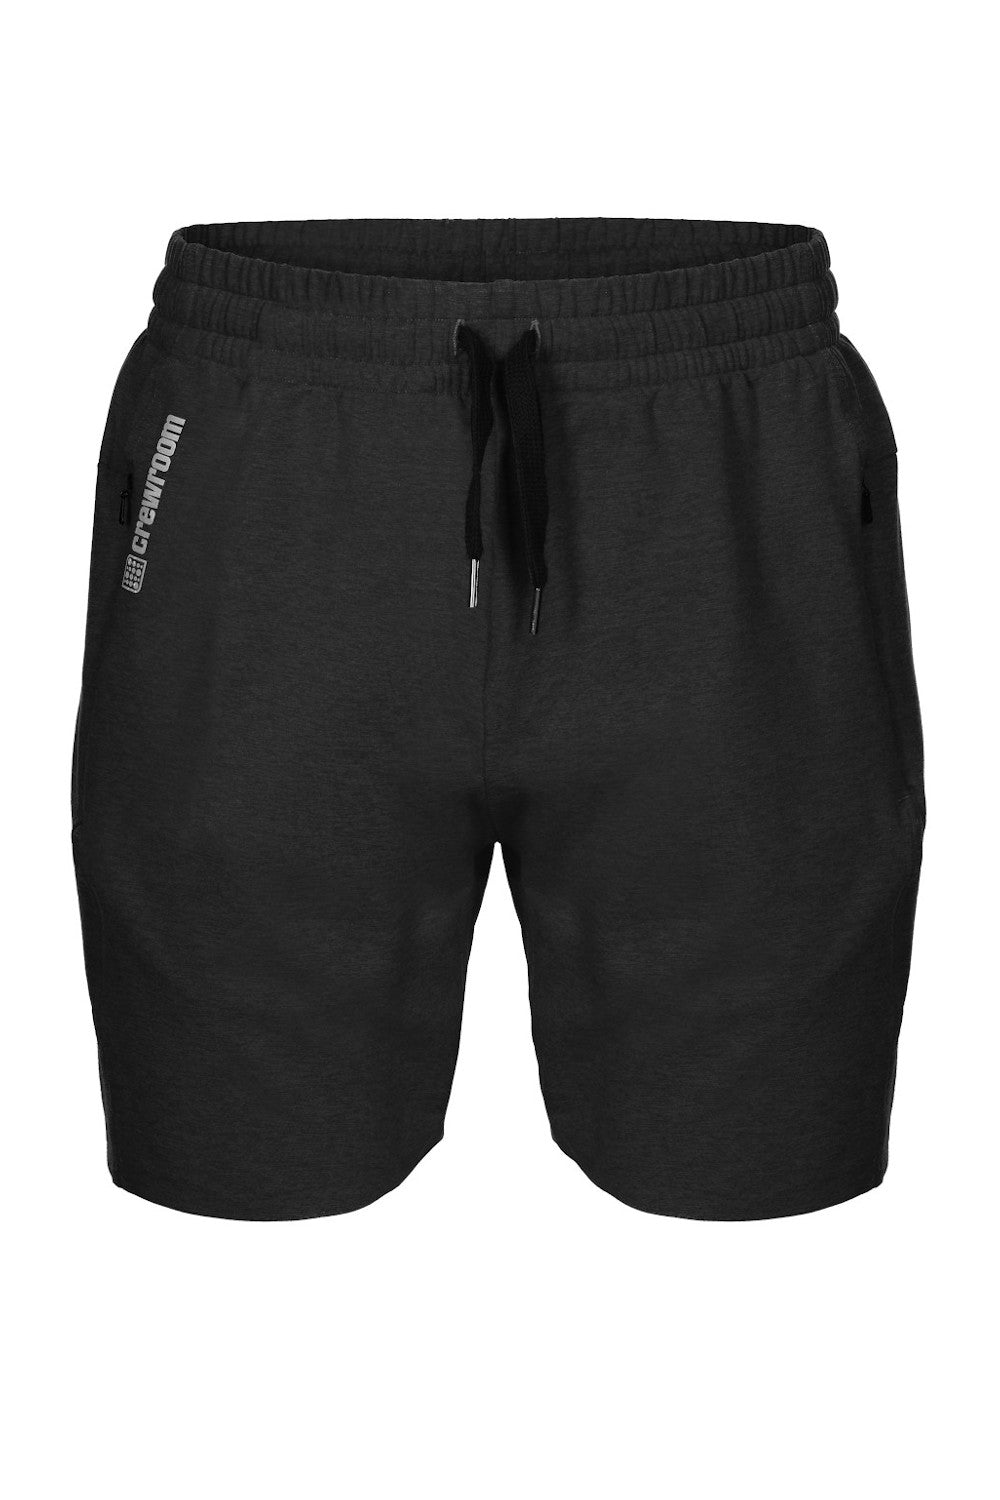 The North West Track Short 8" (Men's)